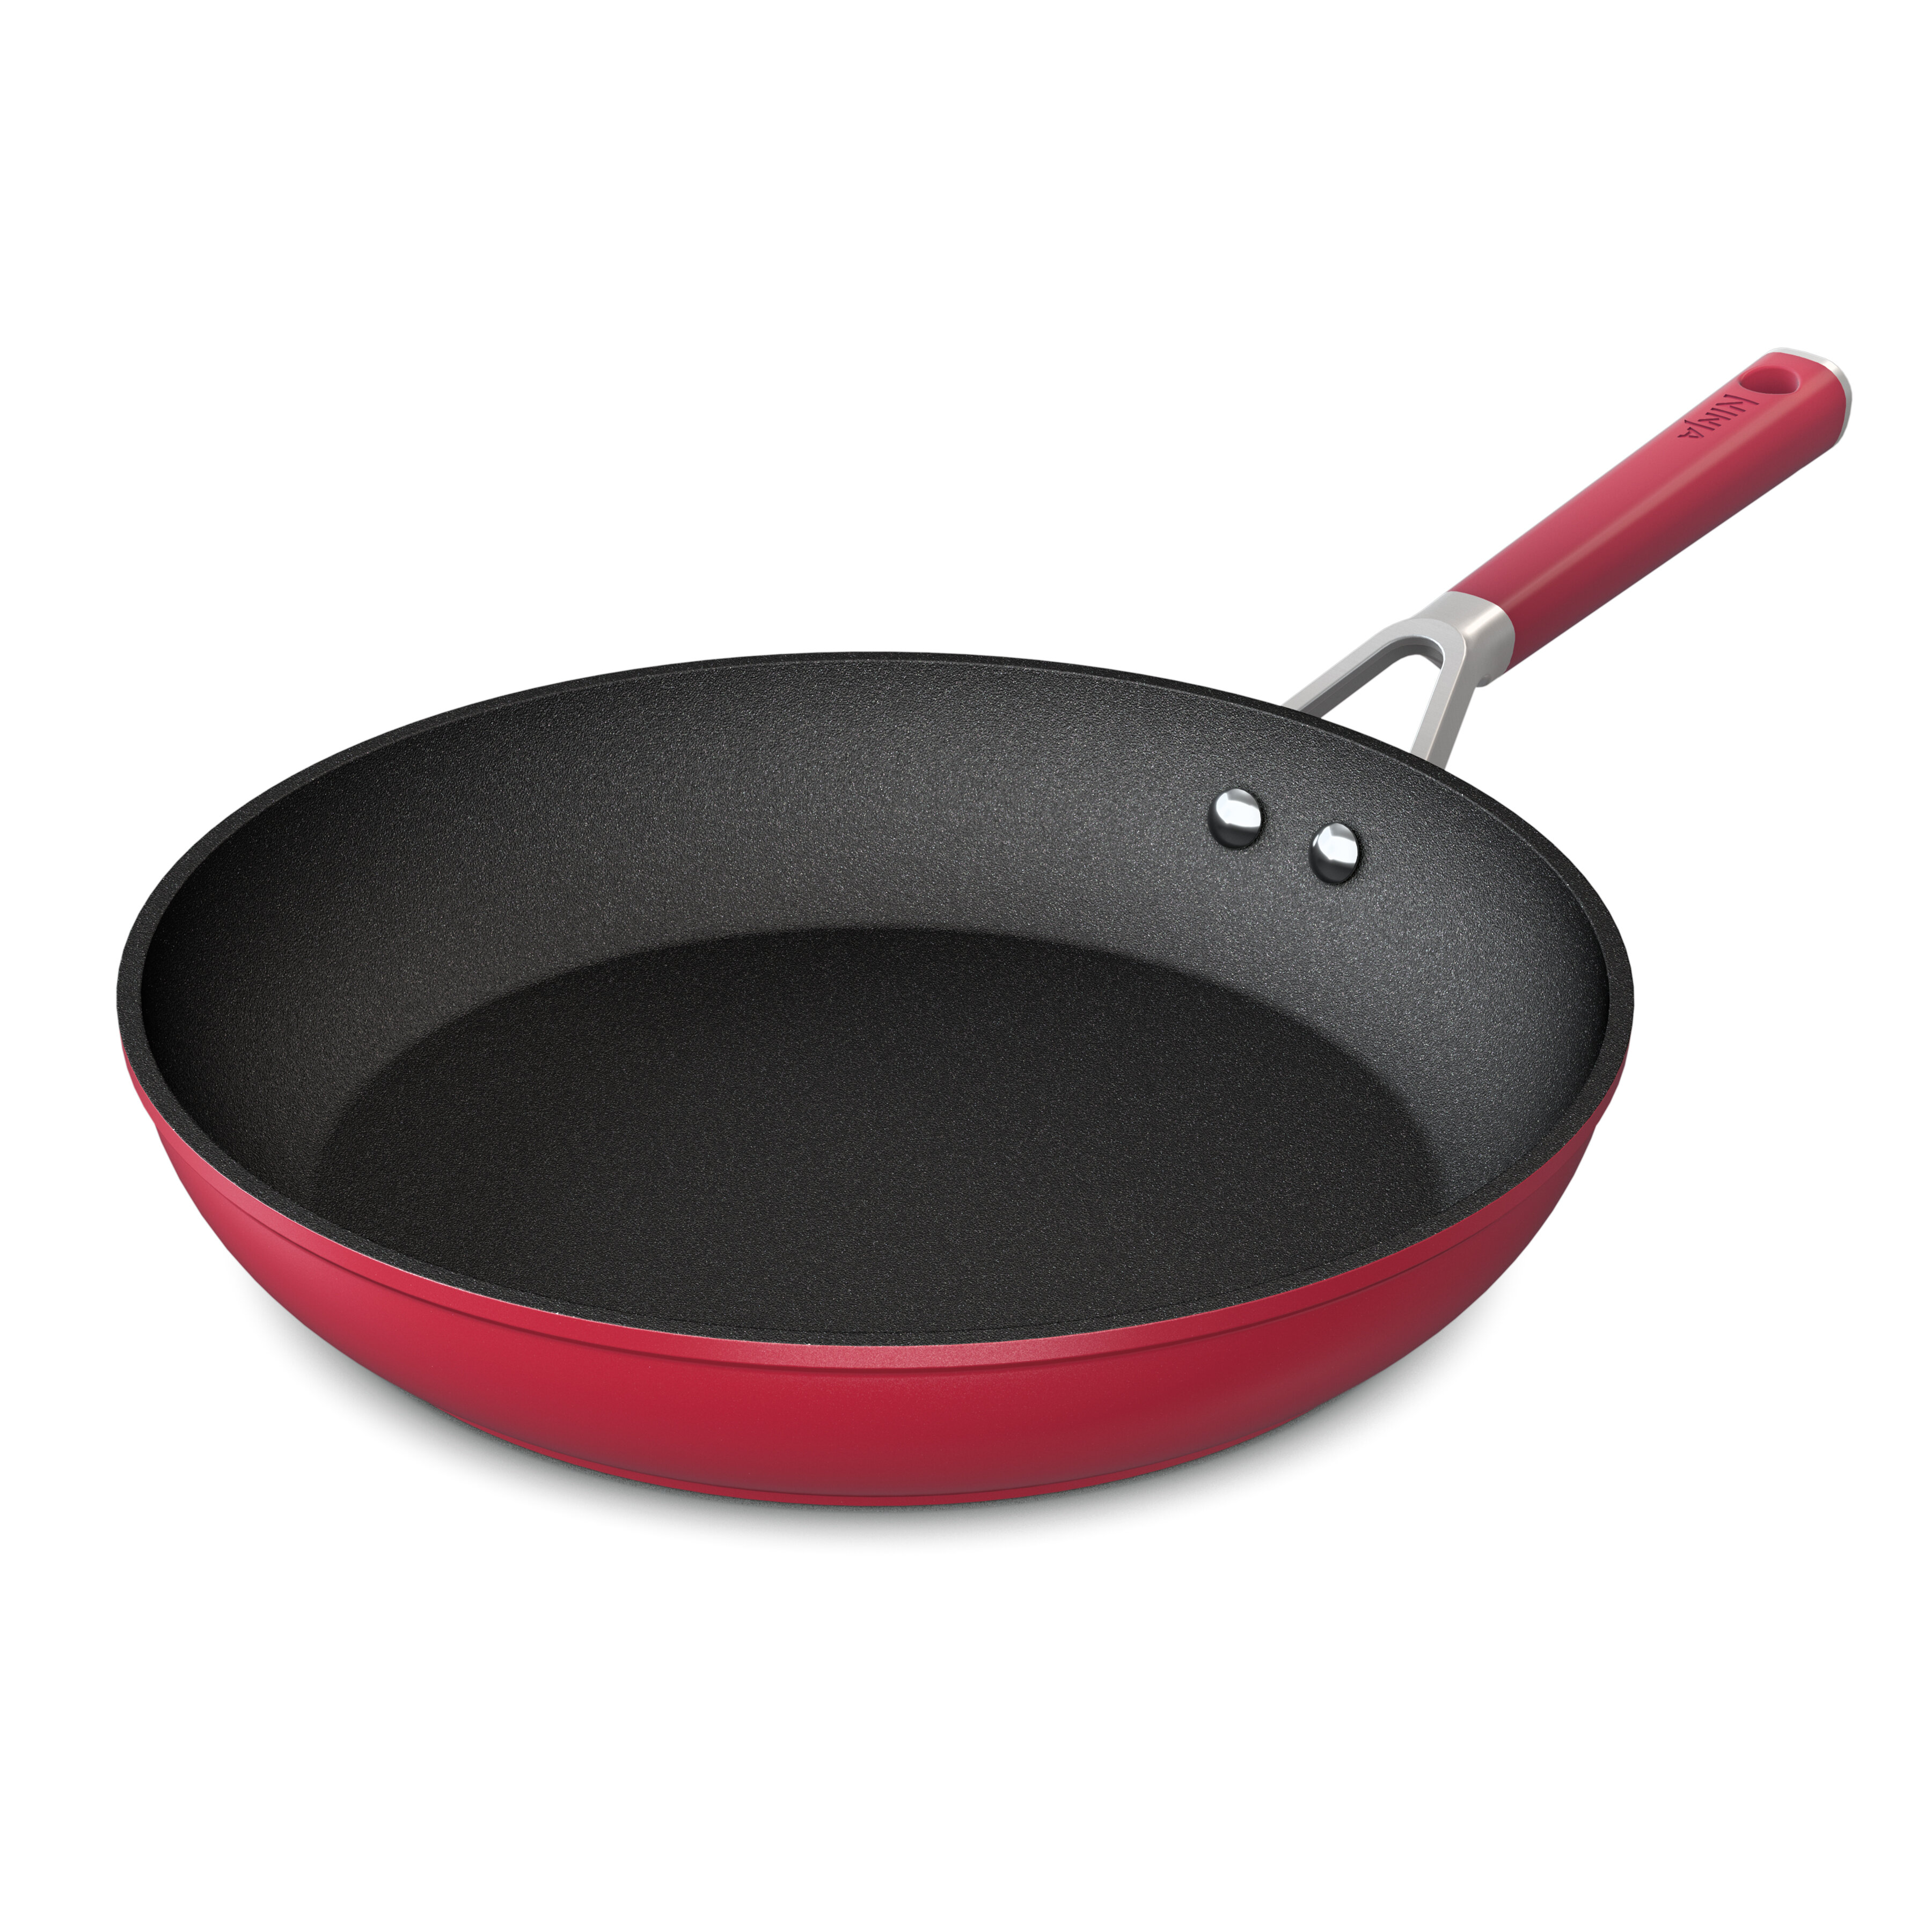 Better Chef 10 Inch Red Aluminum Deep Frying Pan with Glass Lid